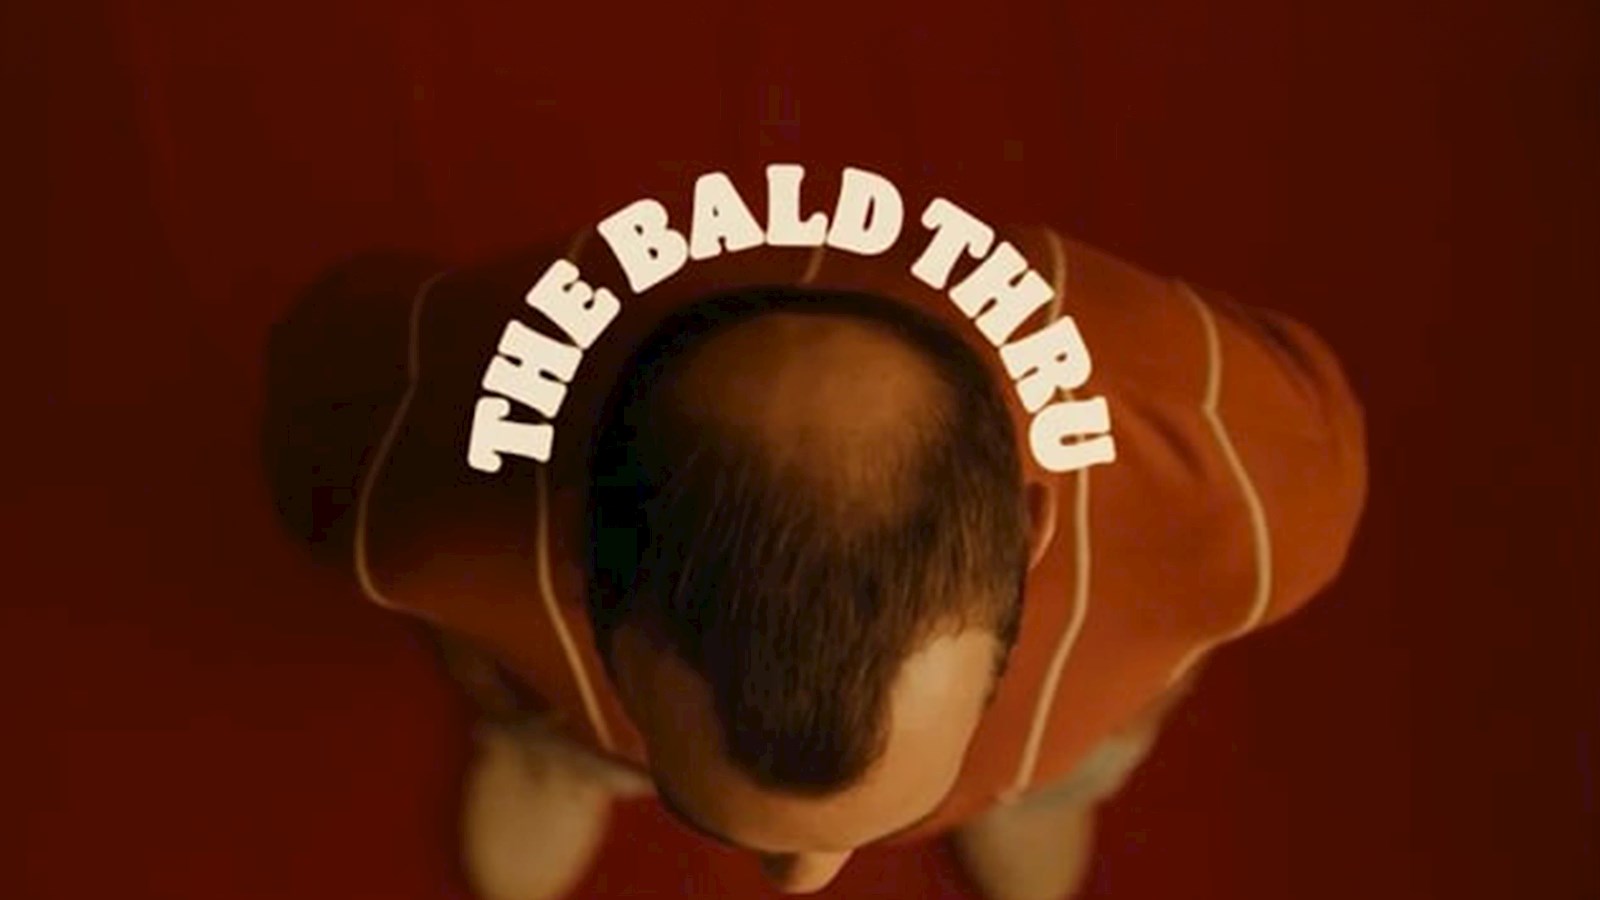 A birds eye view of a balding man standing on a red floor with the text "The Bald Thru" in white